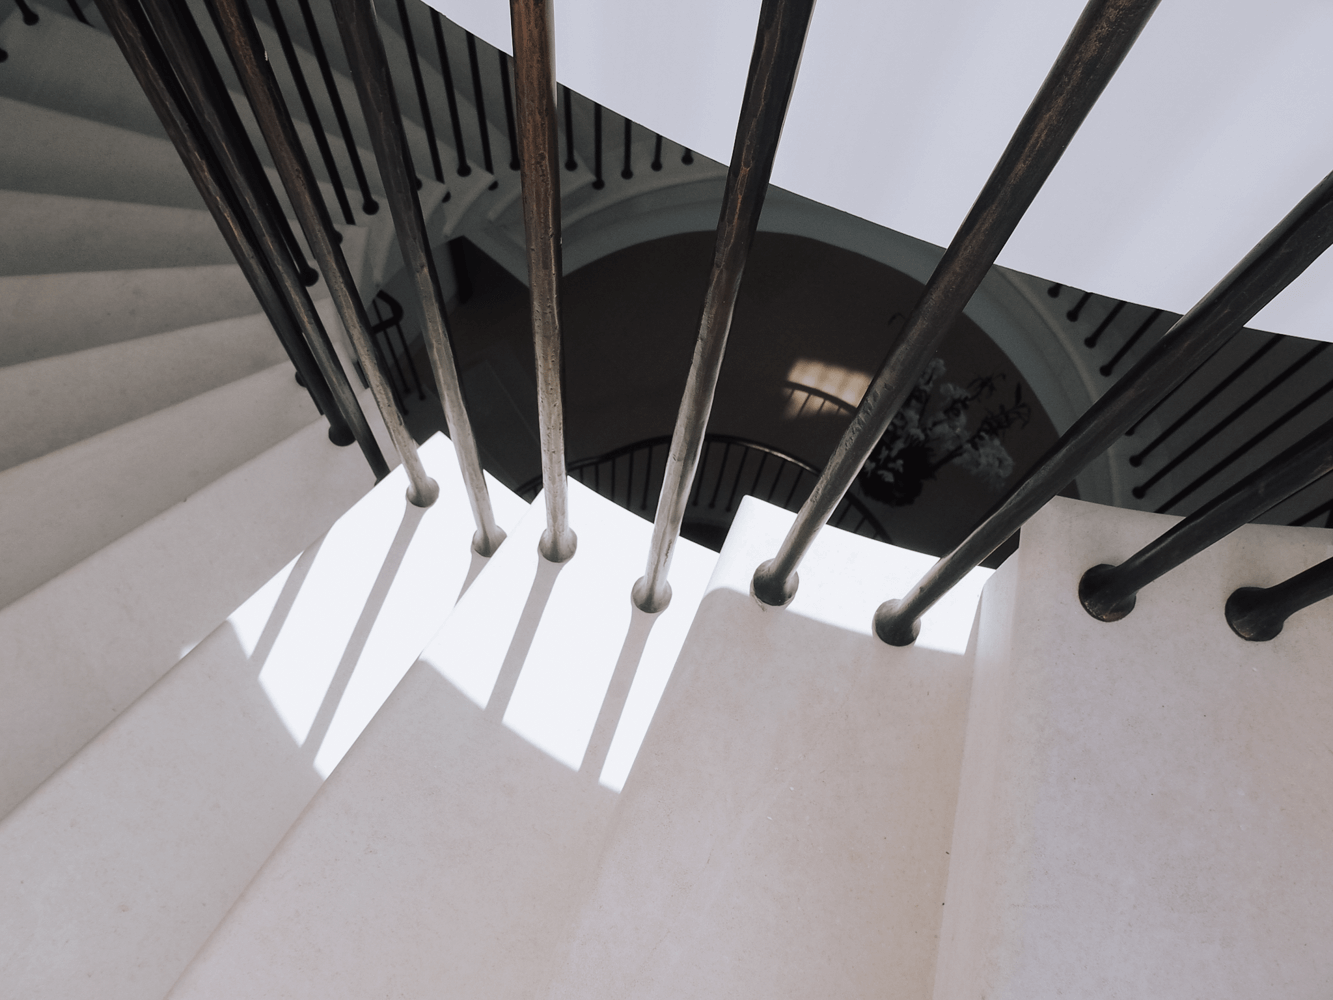 St-Tropez-The-Stonemasonry-Company-Post-Tension-Reinforced-Staircase-16.png